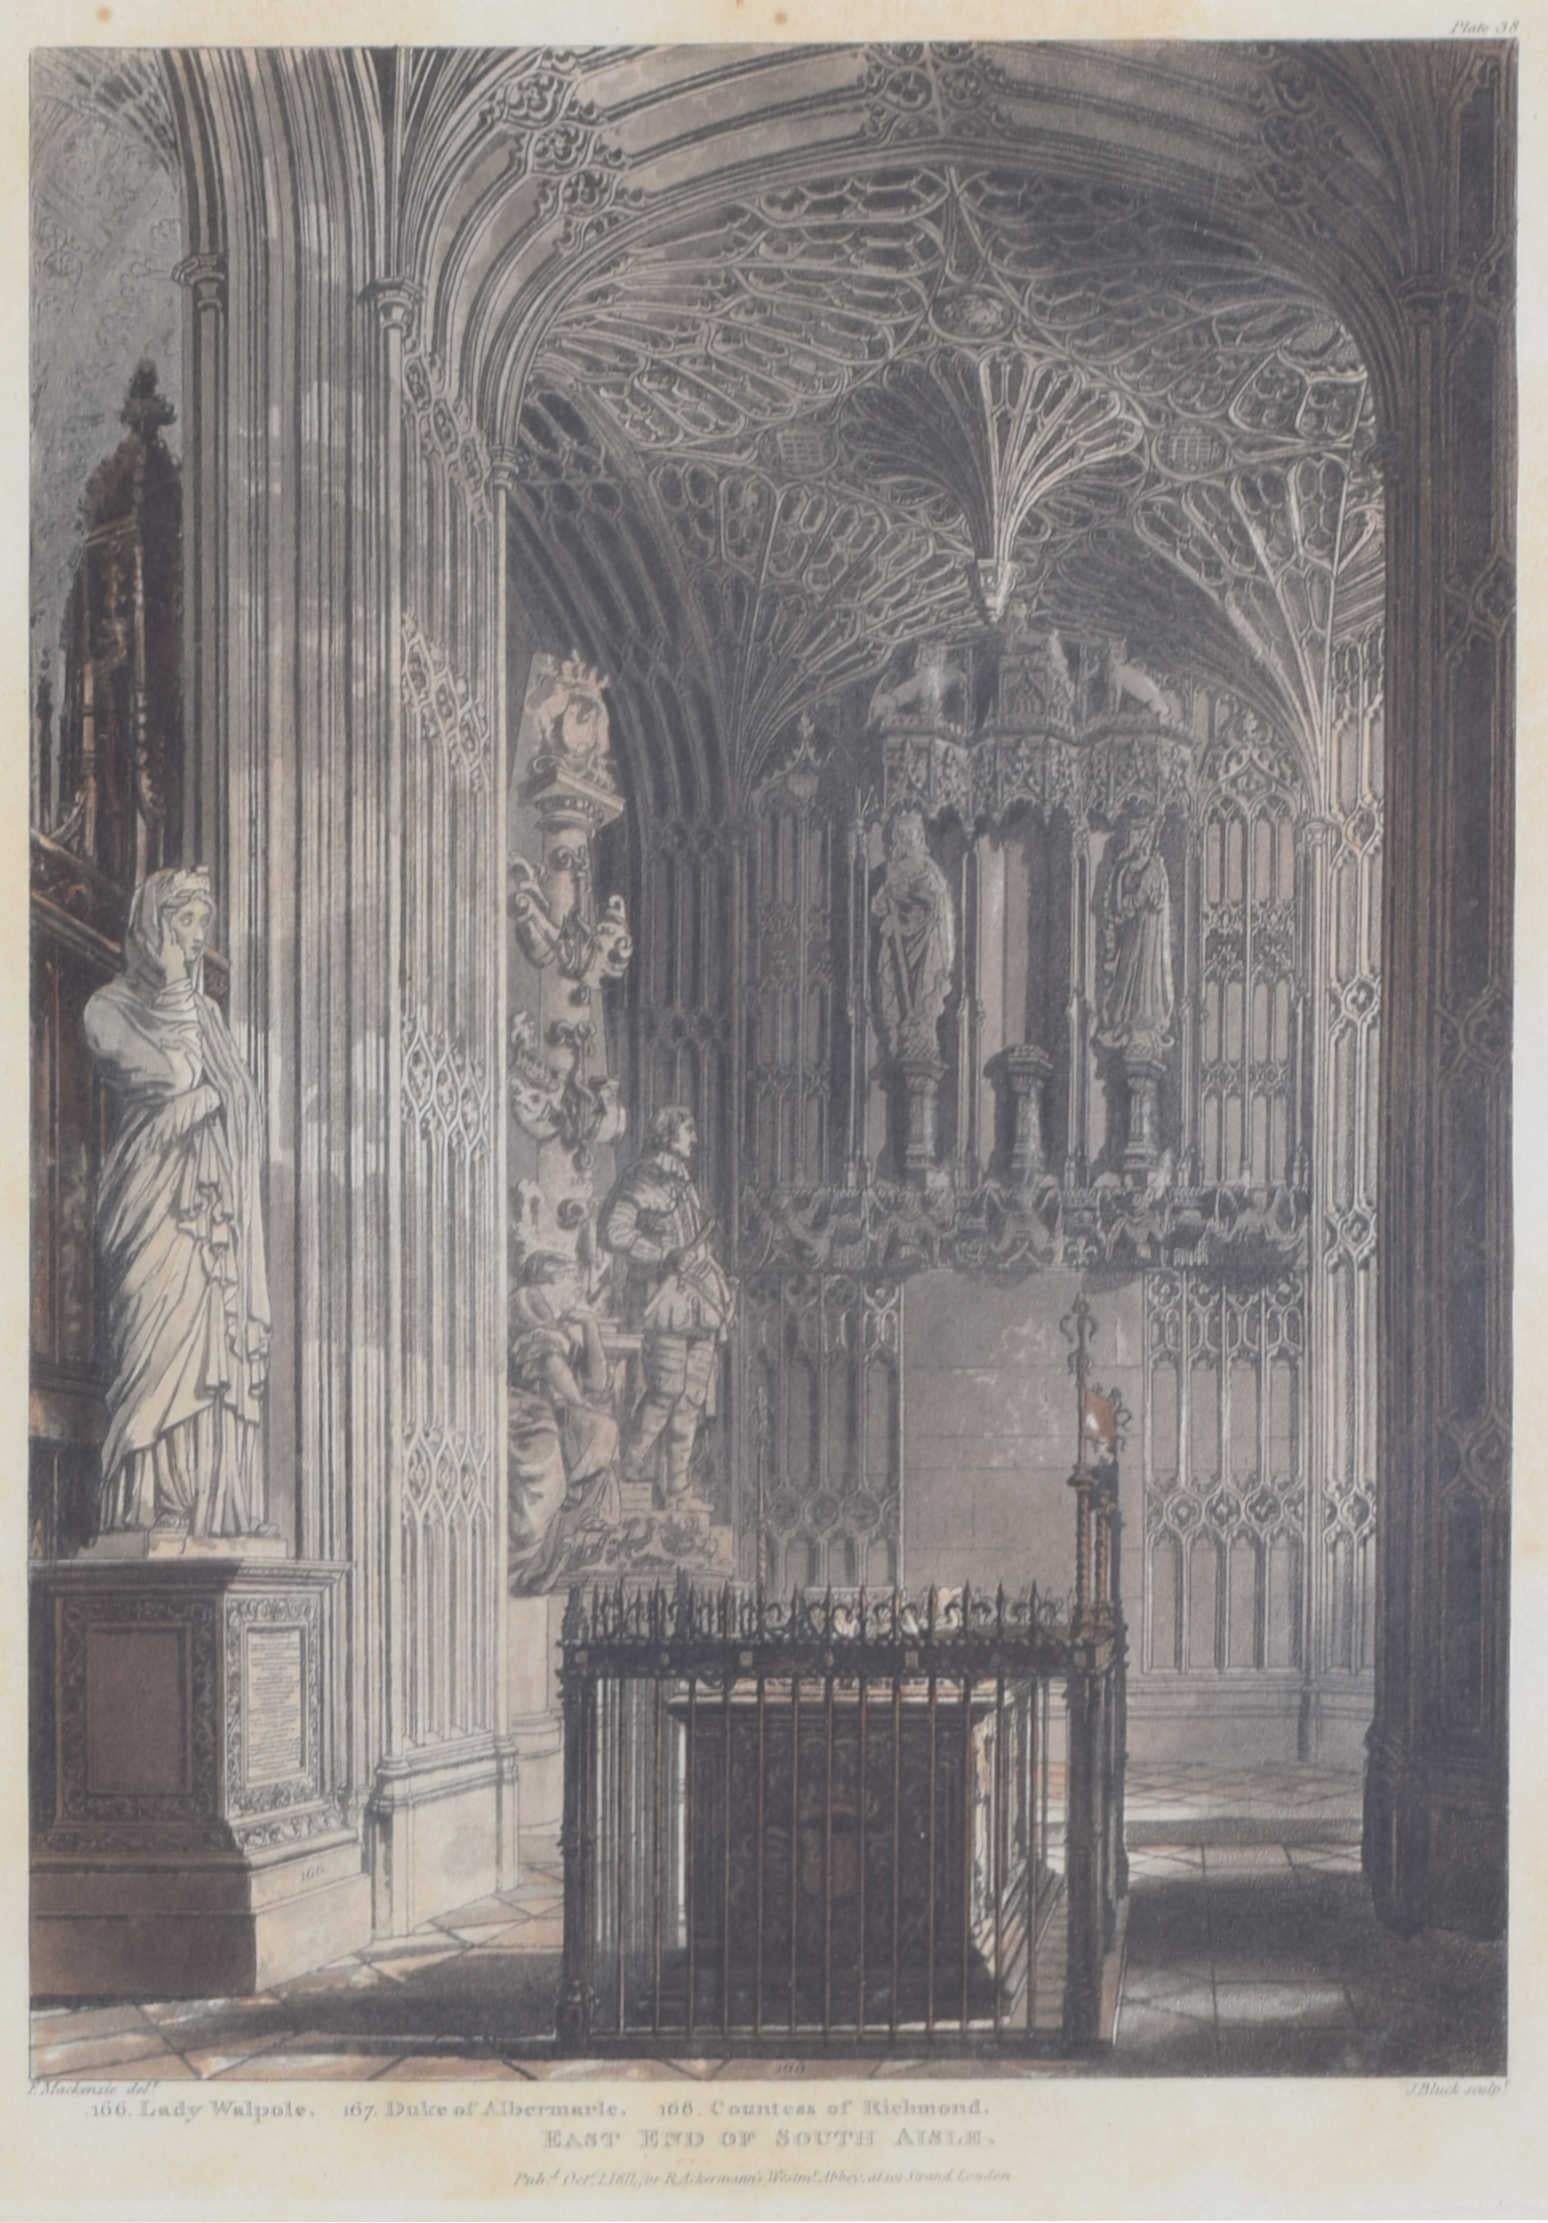 Westminster Abbey South Aisle engraving by J Black for Ackermann - Print by Rudolph Ackermann